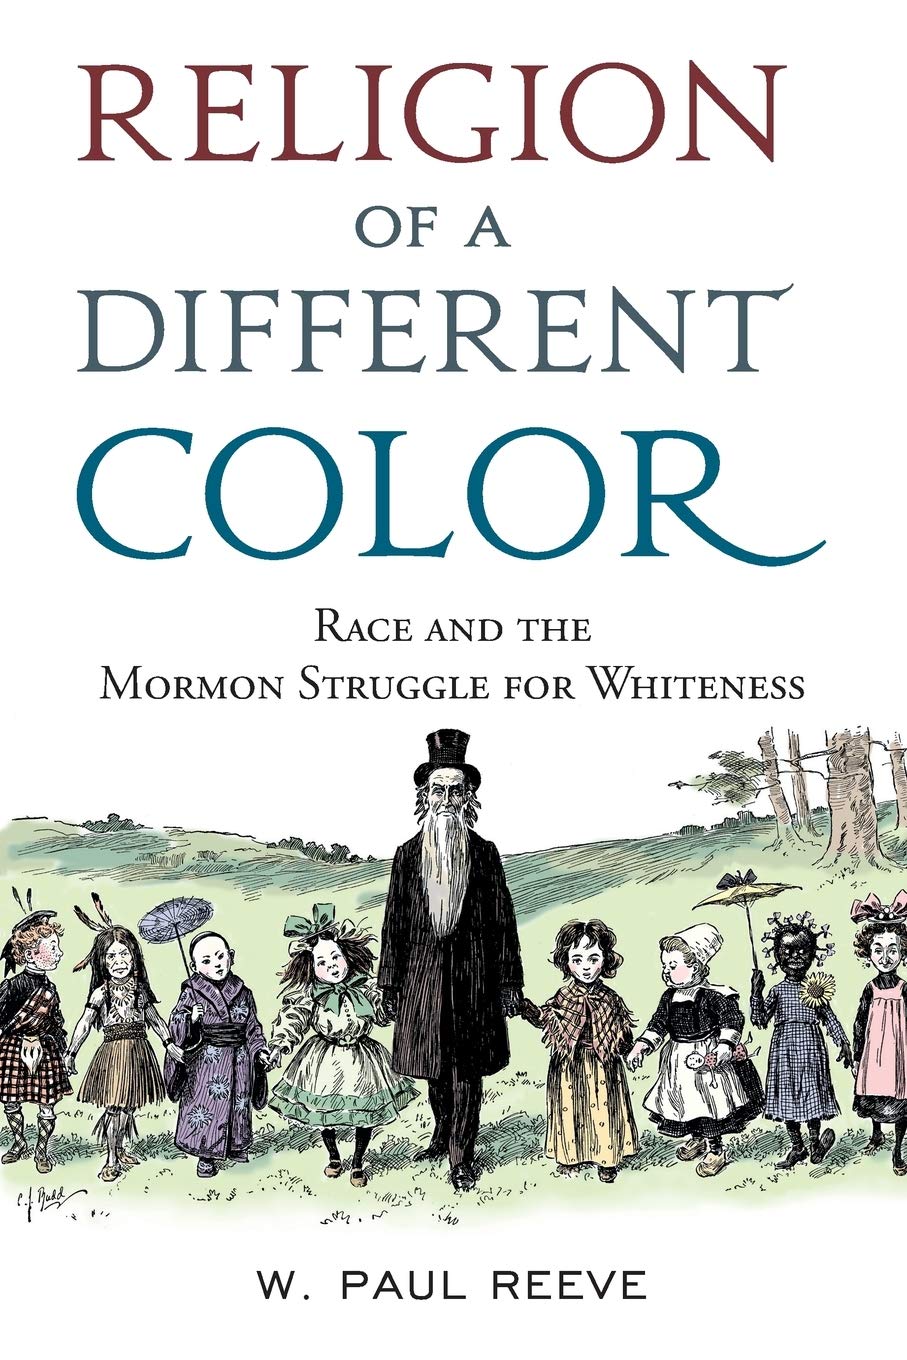 Religion of a different Color book cover